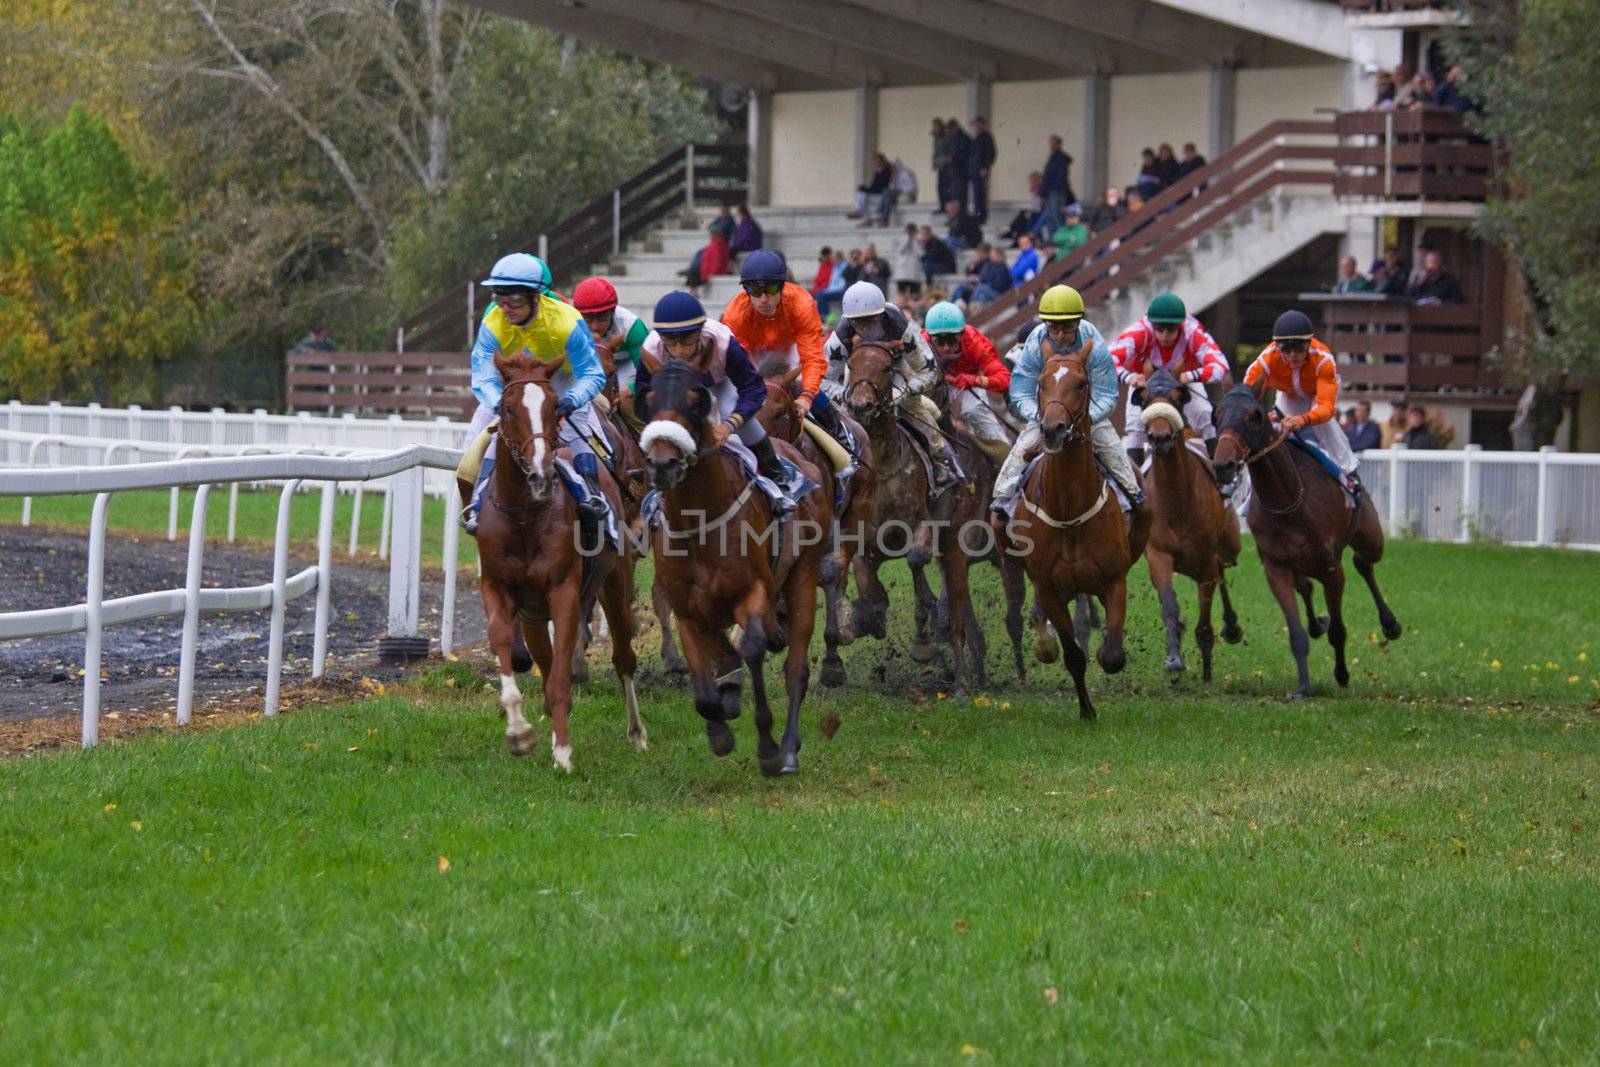 Horse Racing in France 1 by pjhpix